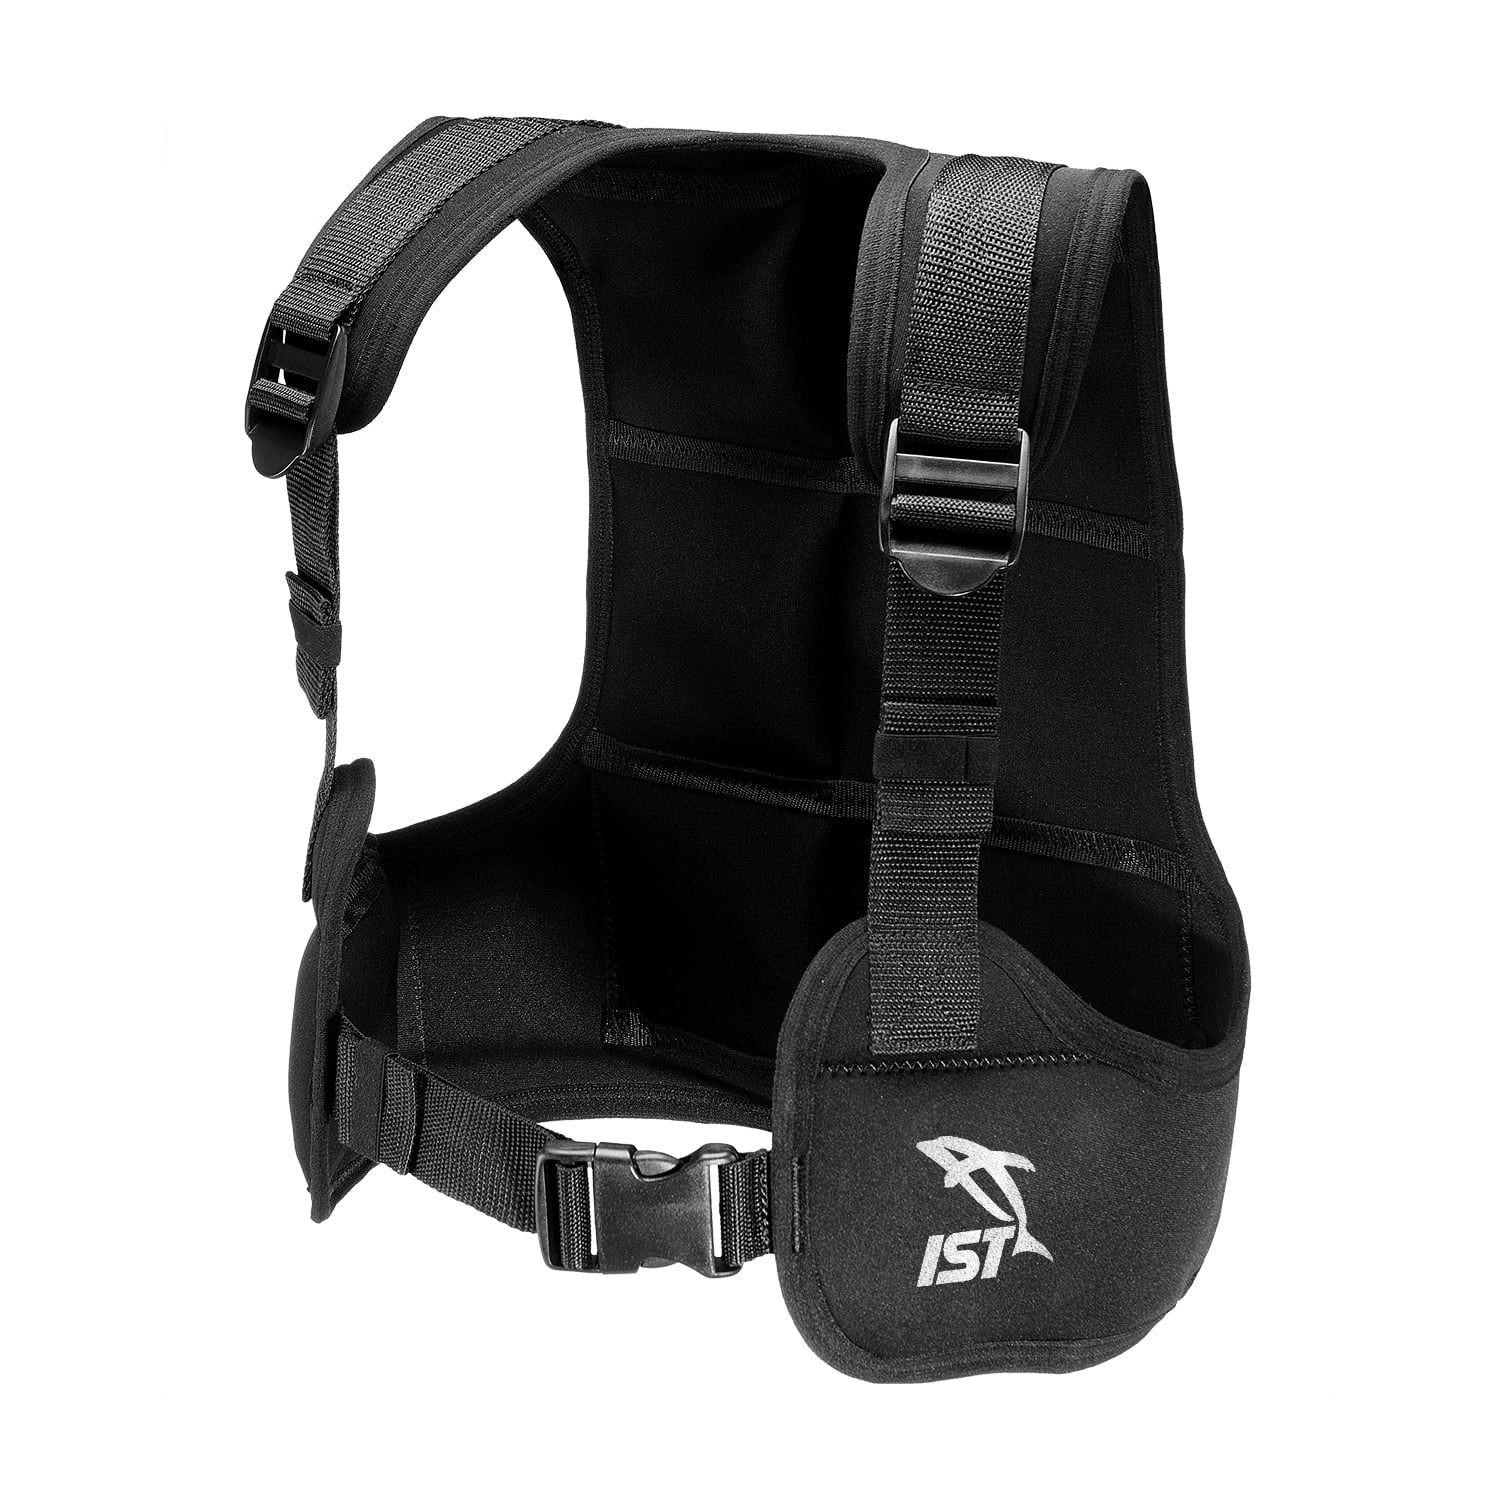 IST VSA0240 Free Diving / Apnea Weight Vest, Holds Up to 35lbs (Medium ...